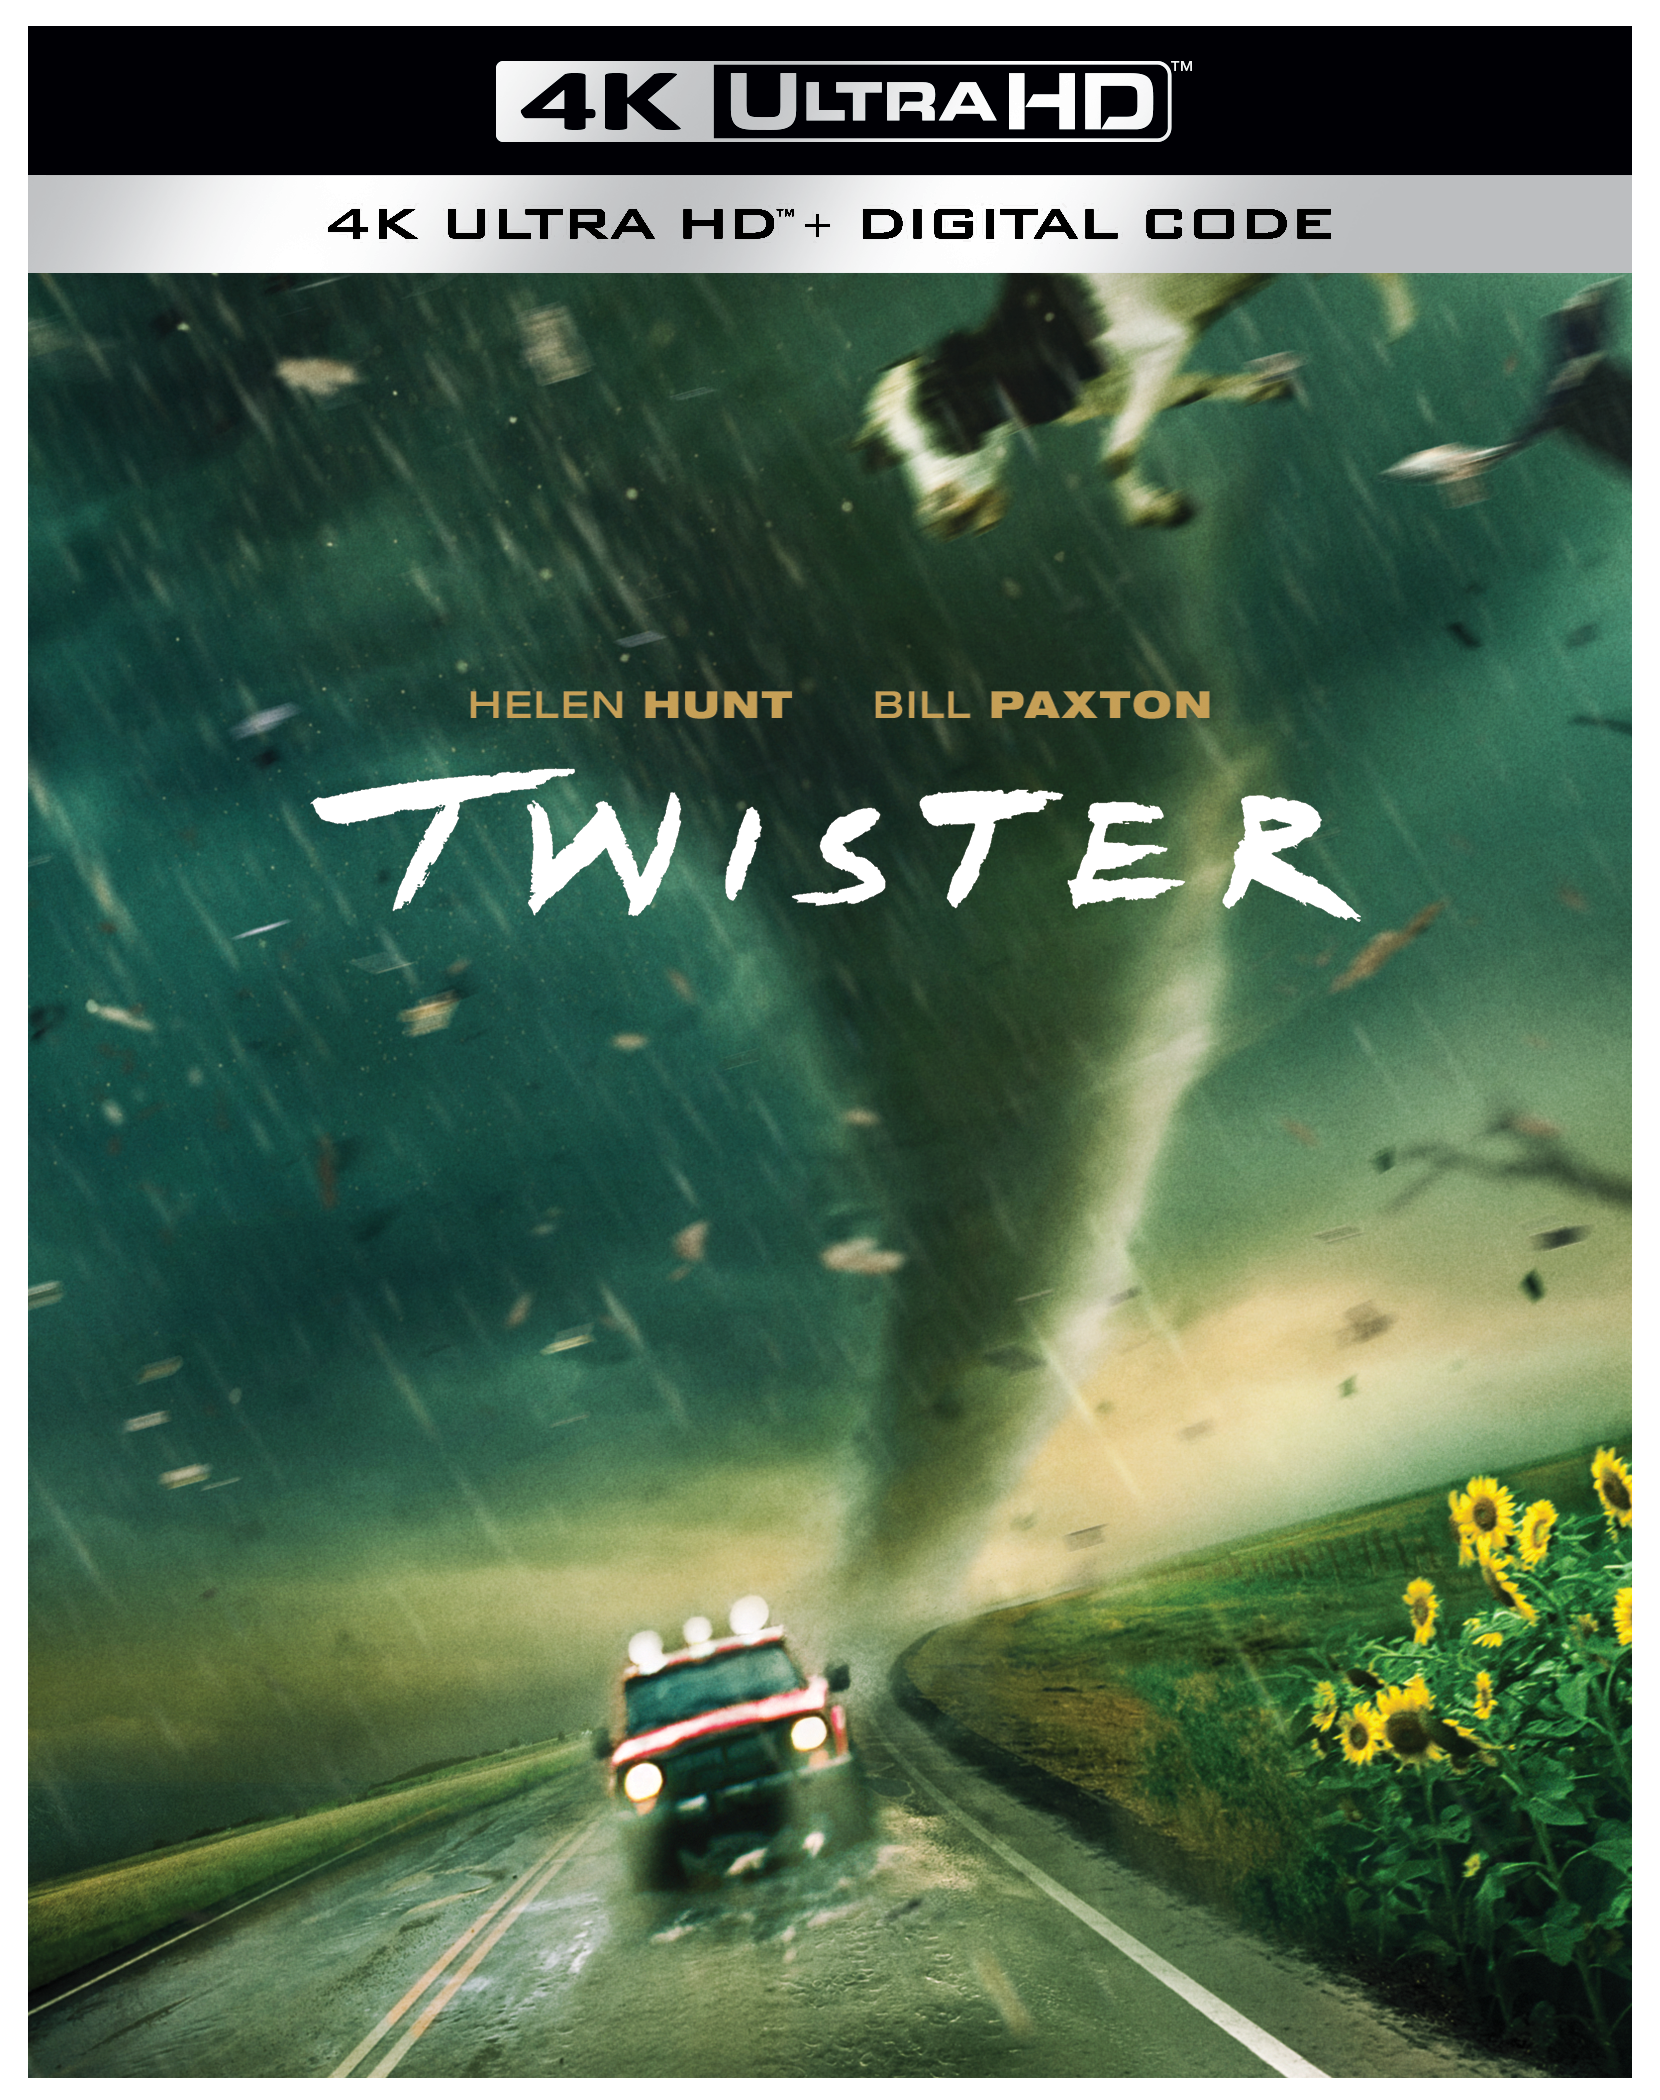 Twister in 4k from Warner Brothers